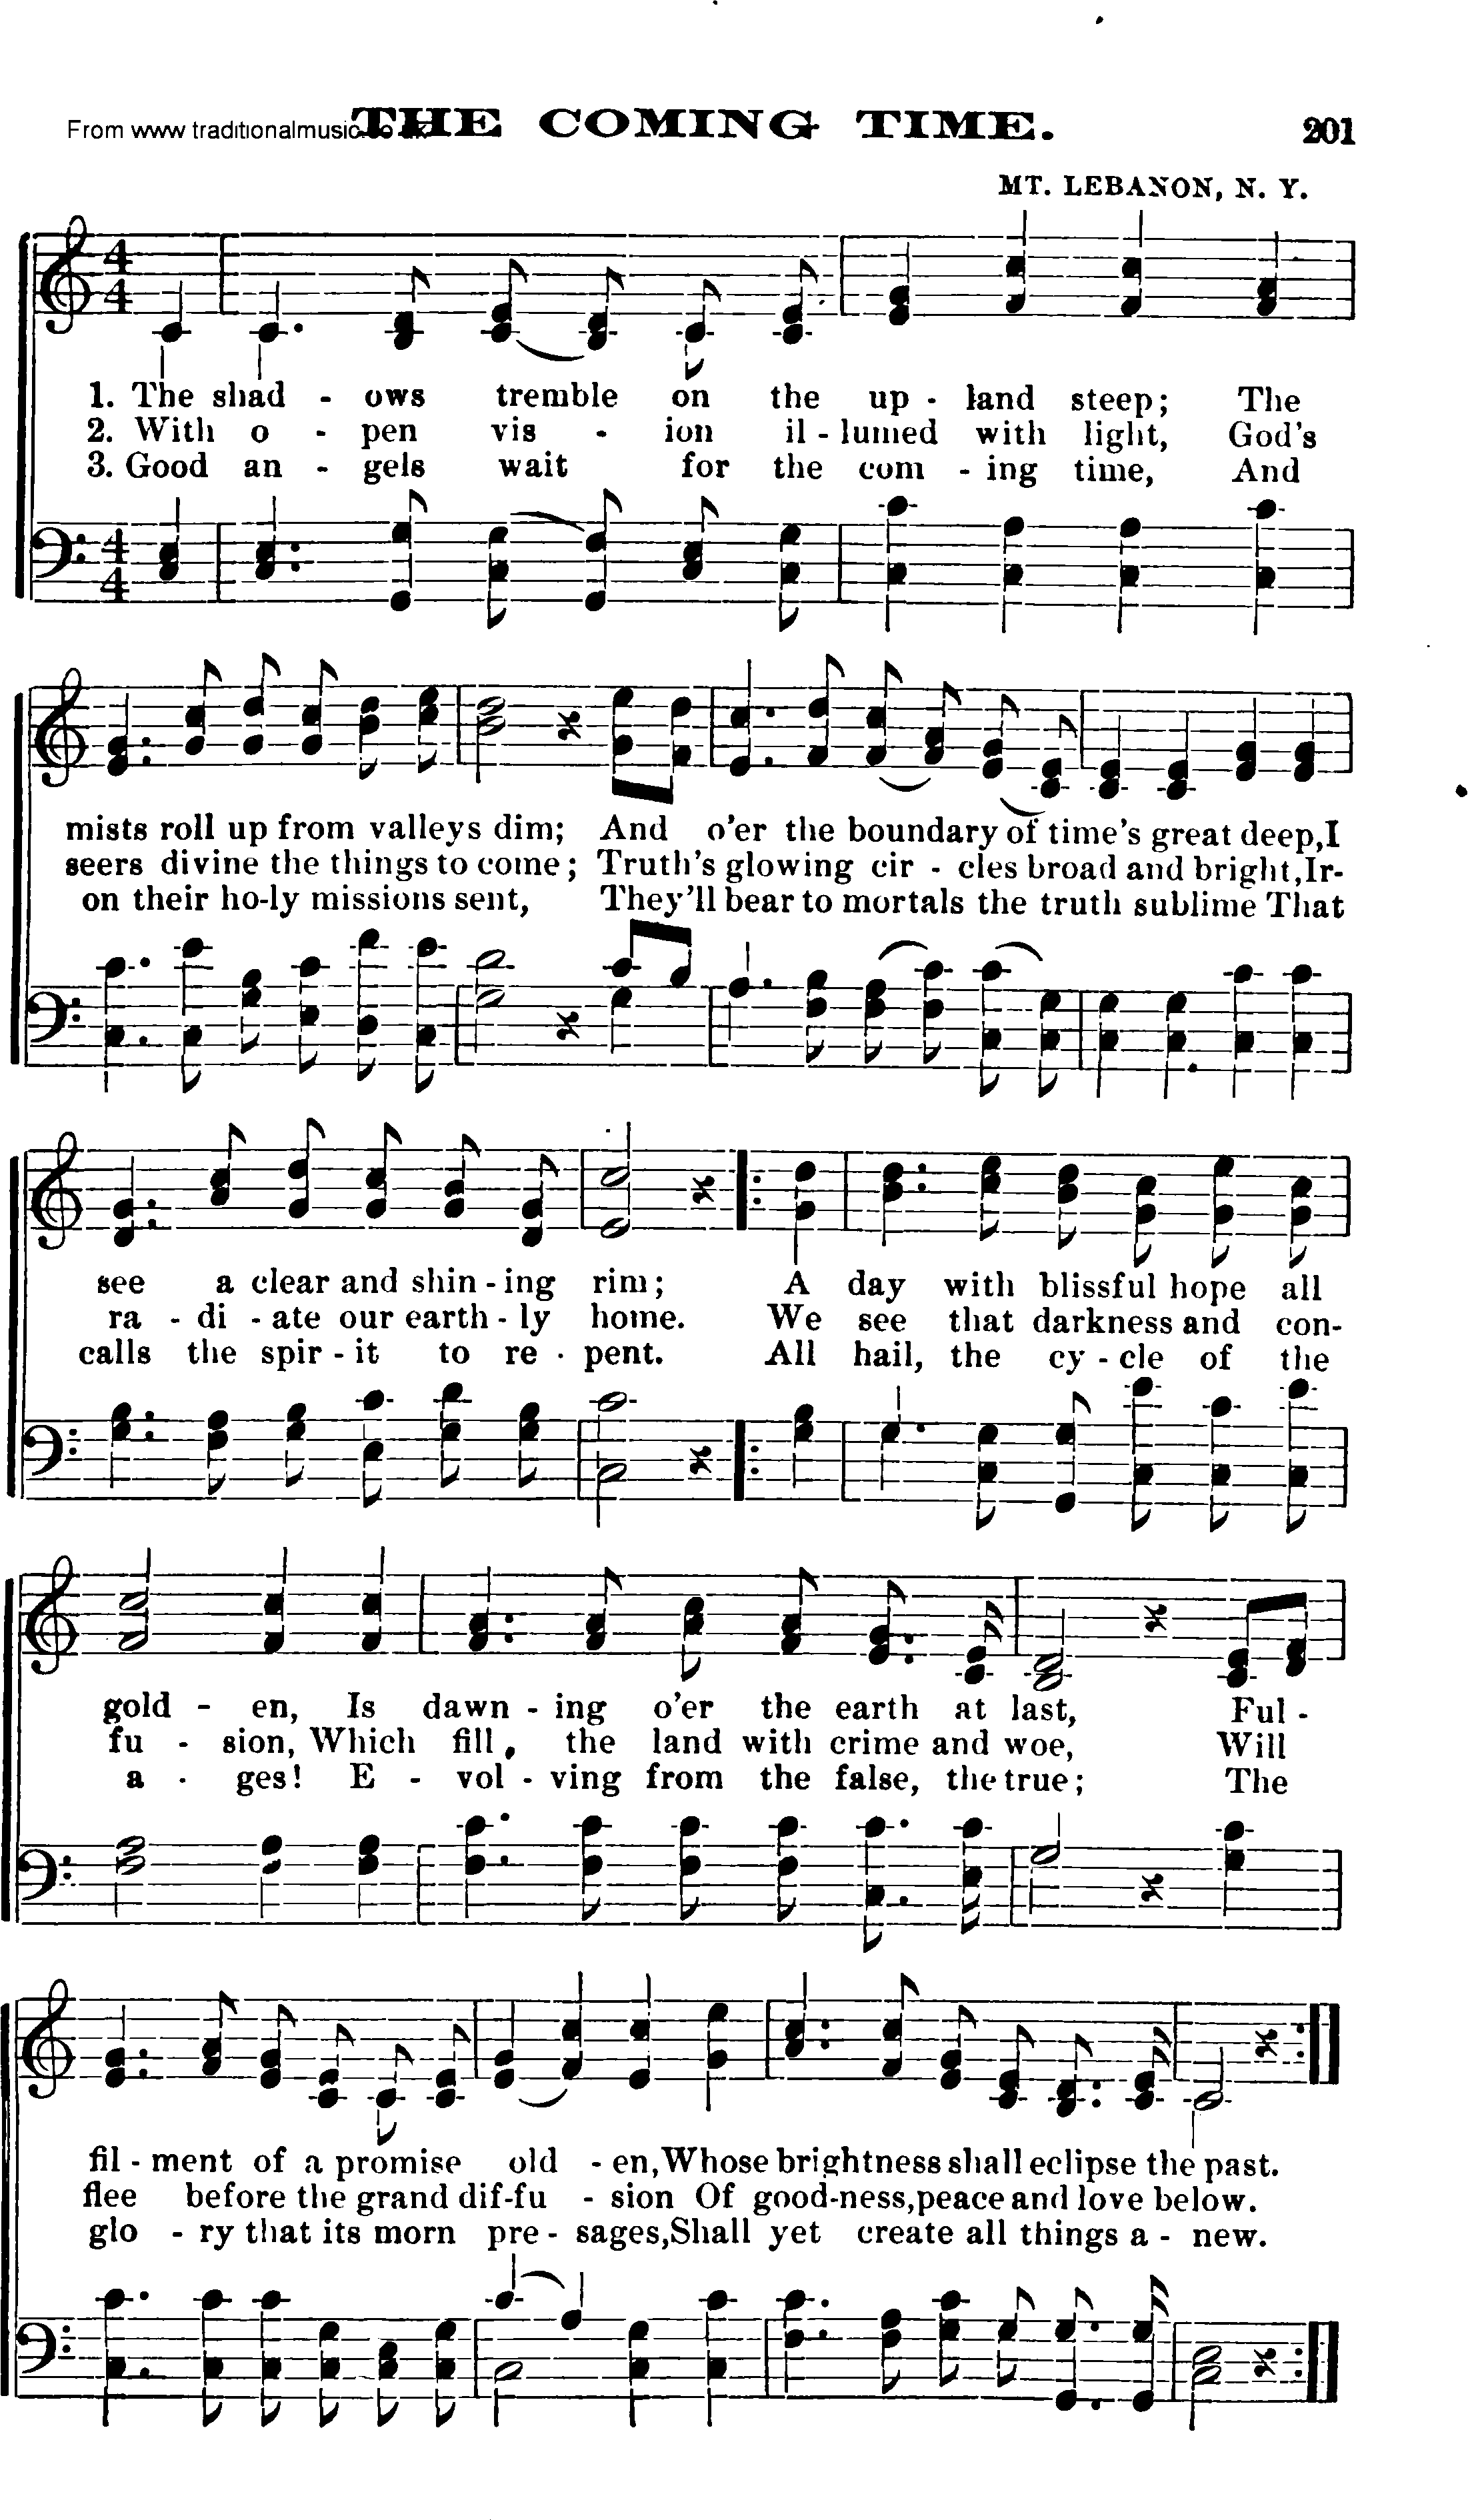 Shaker Music collection, Hymn: The Coming Time, sheetmusic and PDF